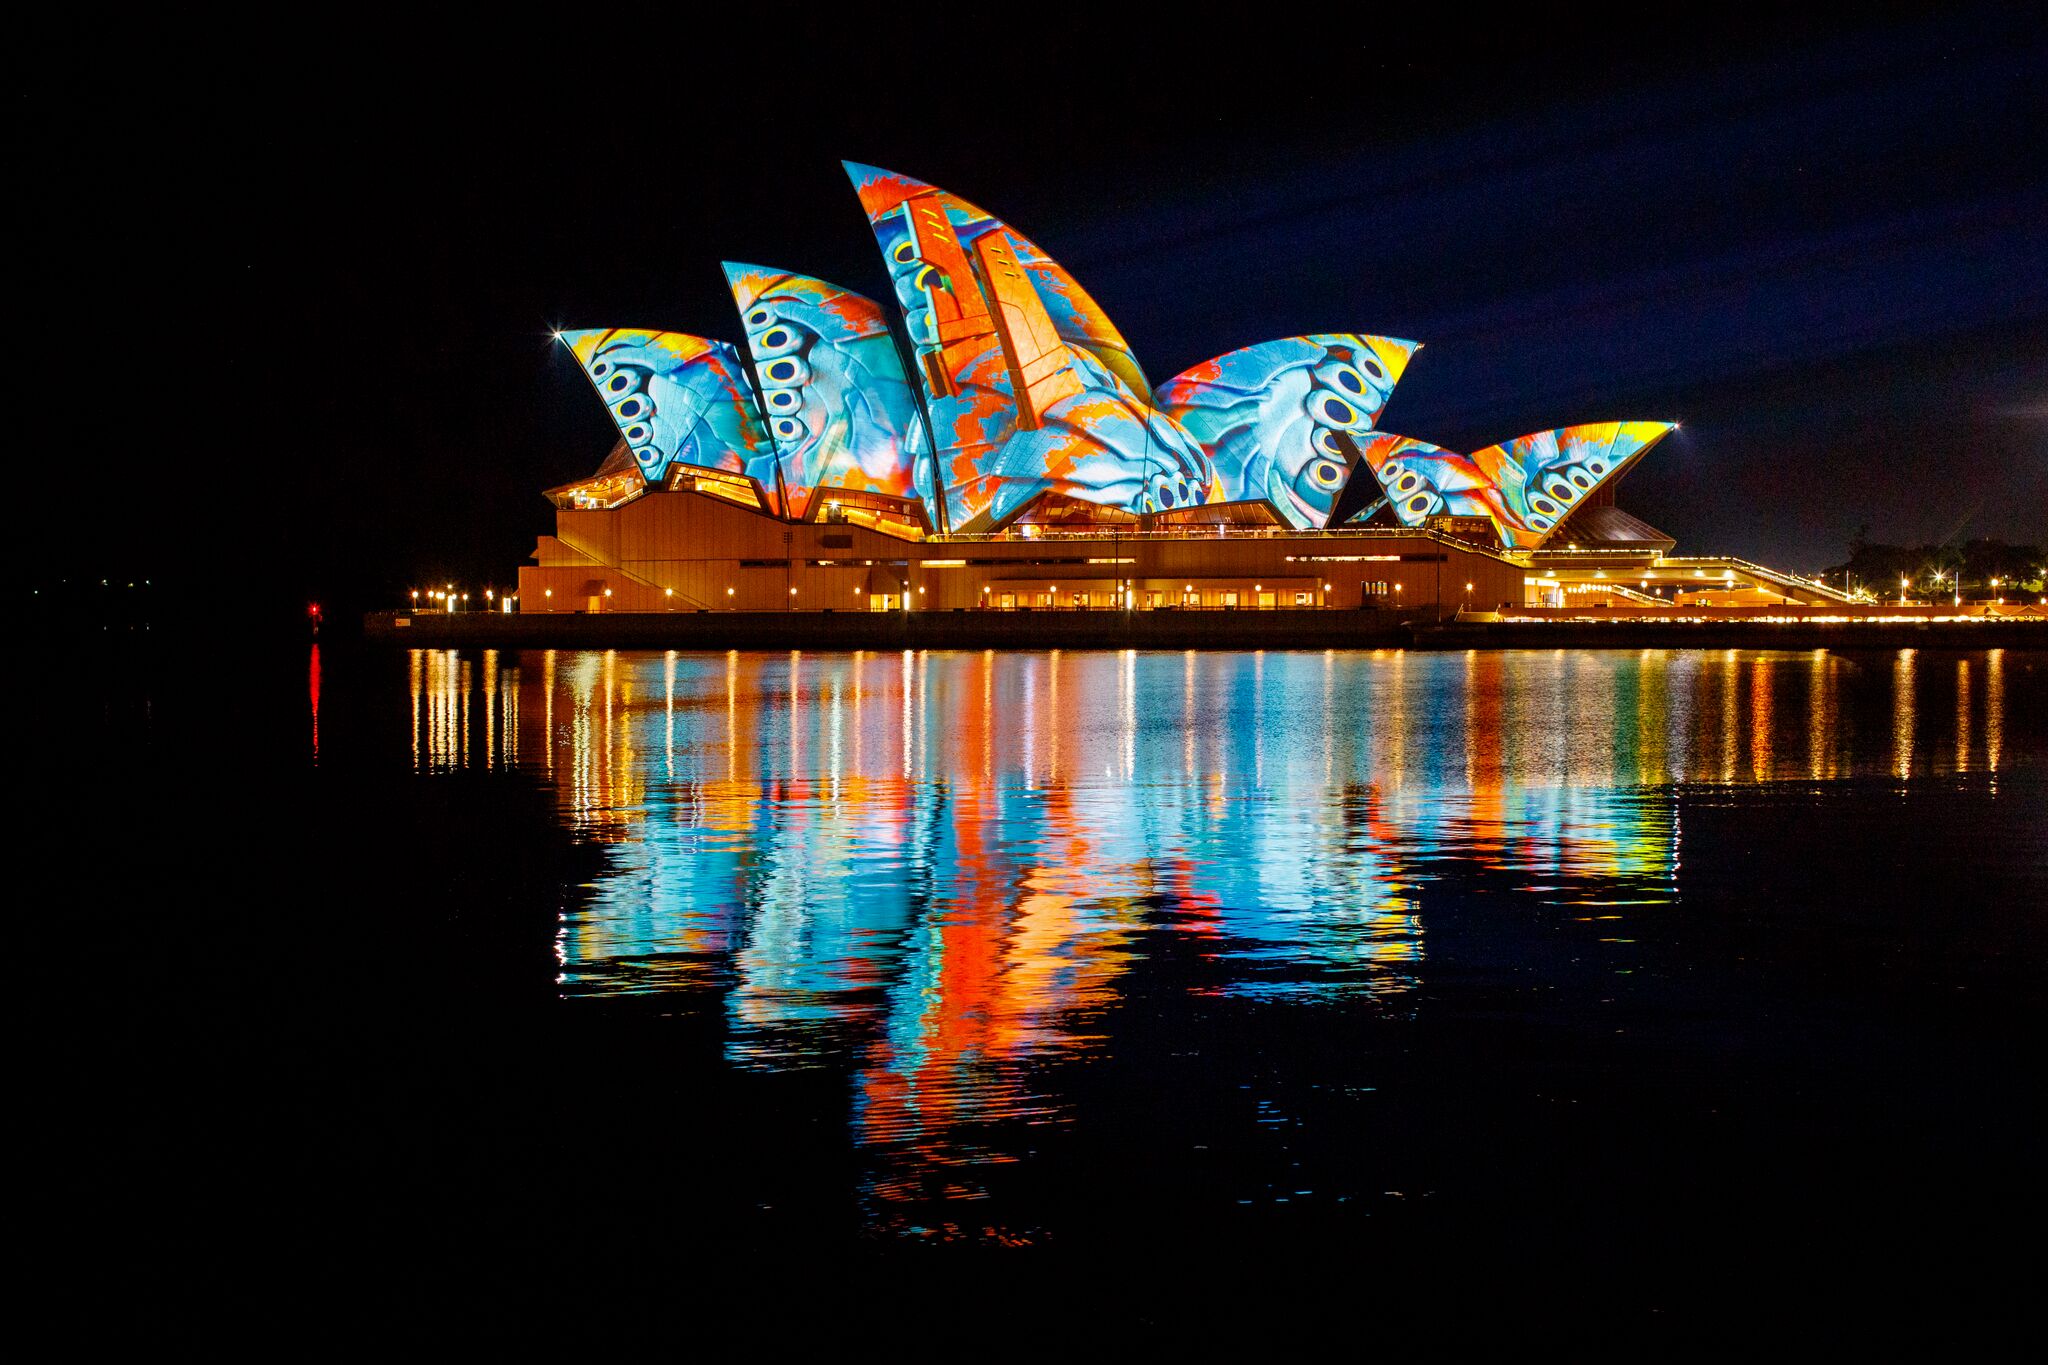 Vivid-Sydney-2017-Lighting-Of-The-Sails-Audio-Creatures-Photo-by-Destination-NSW-and-James-Horan.jpg